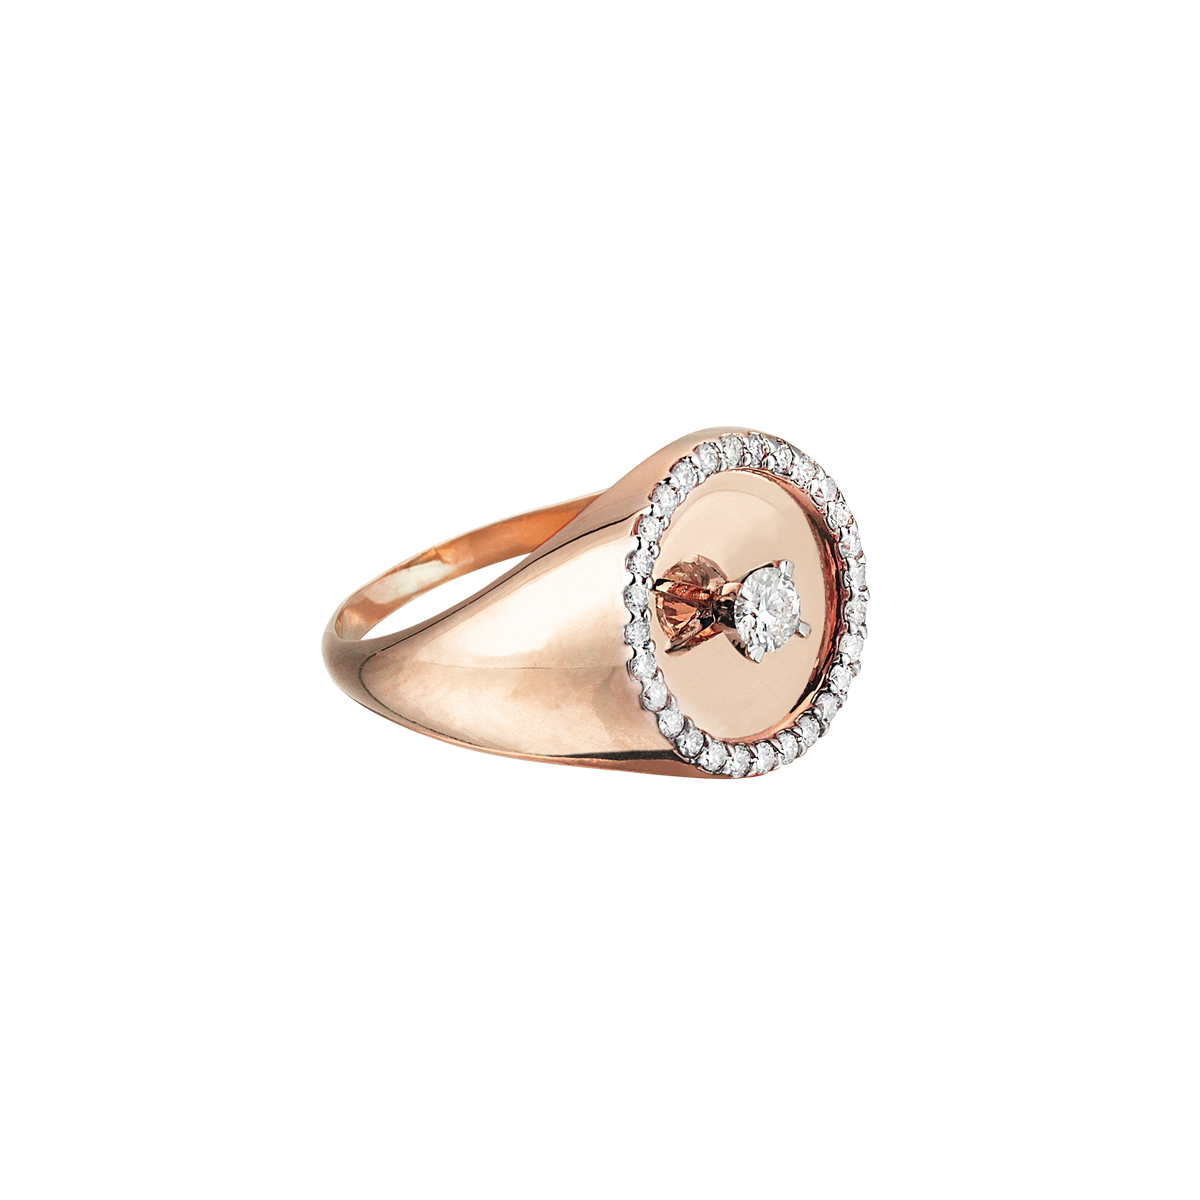 Precious Mom Ring in Rose Gold - Her Story Shop